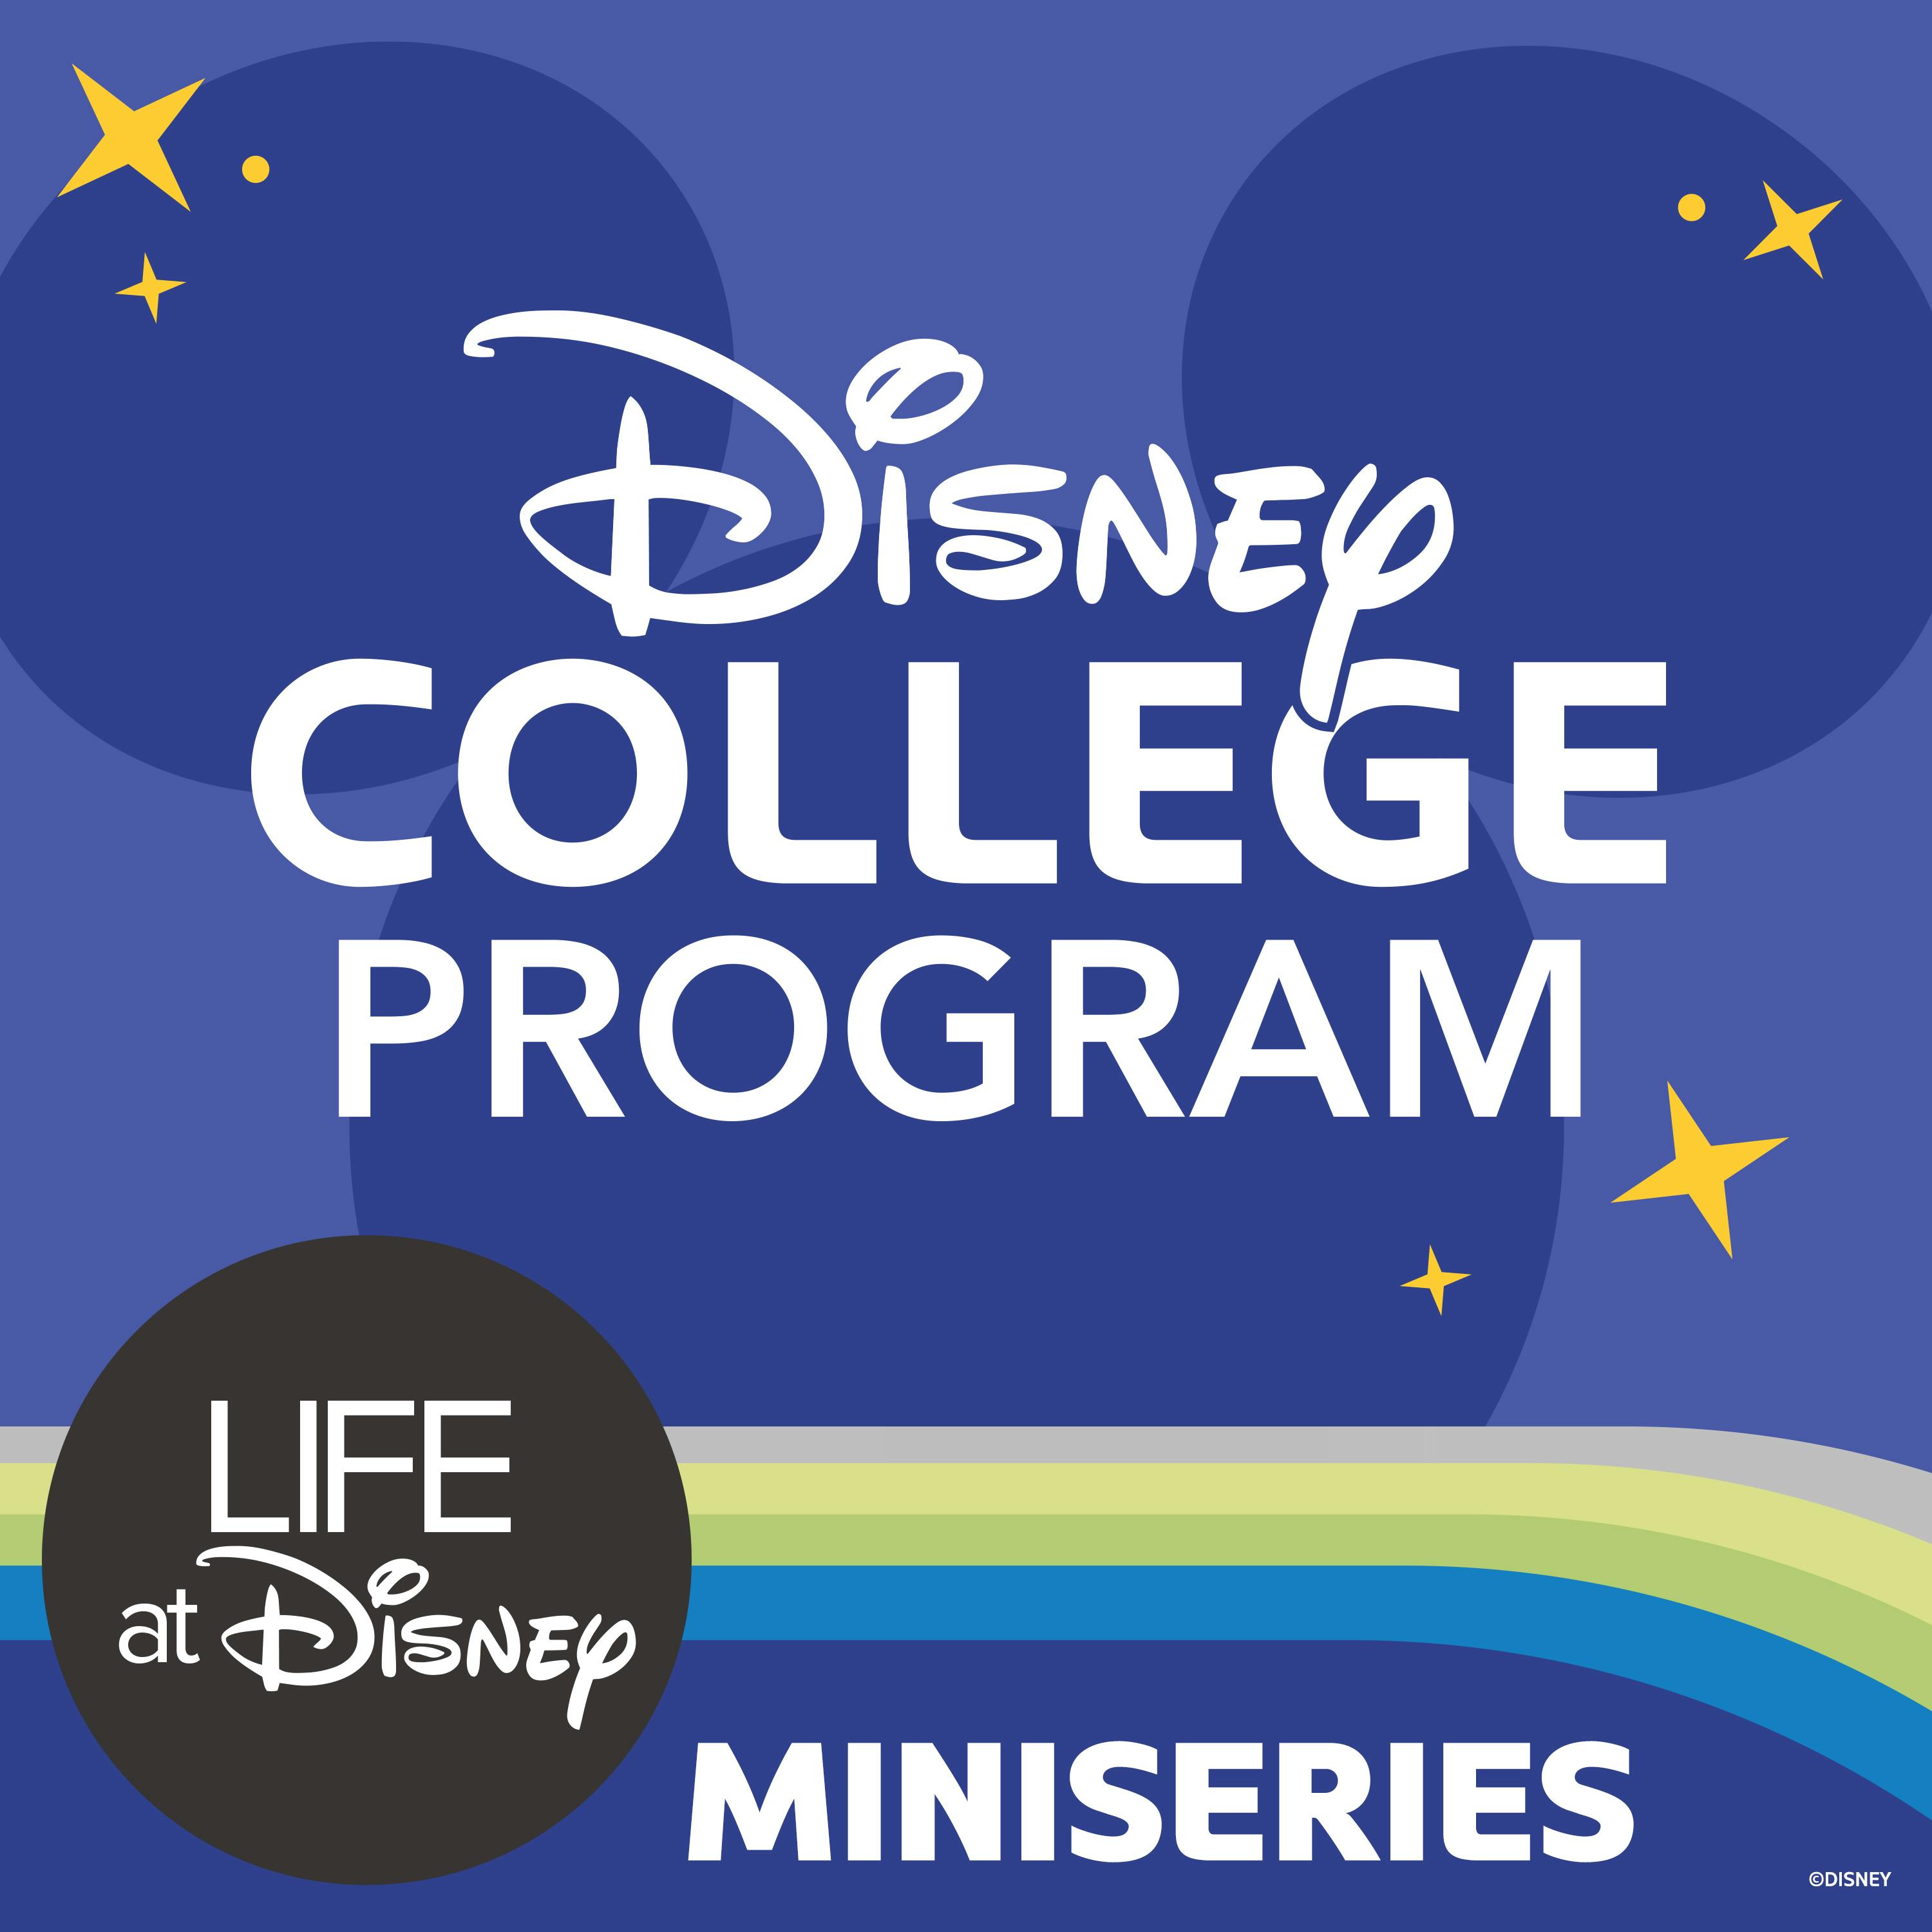 DCP MINISERIES 1 - It All Started with a Disney College Program